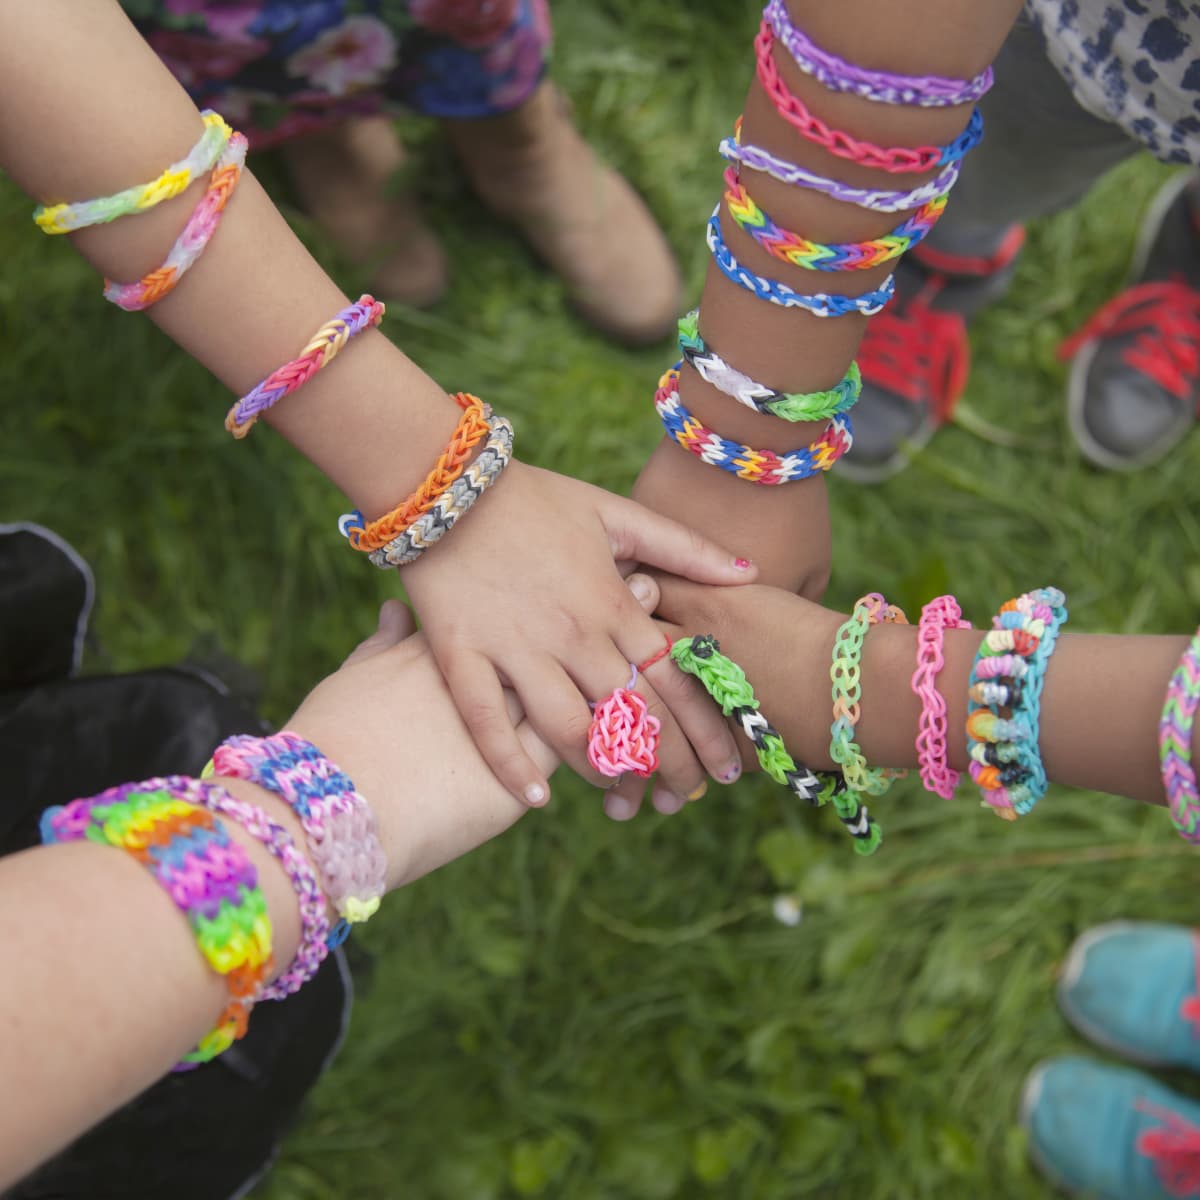 Taylor Swift Era's Tour Friendship Bracelets: Why Fans Are Trading